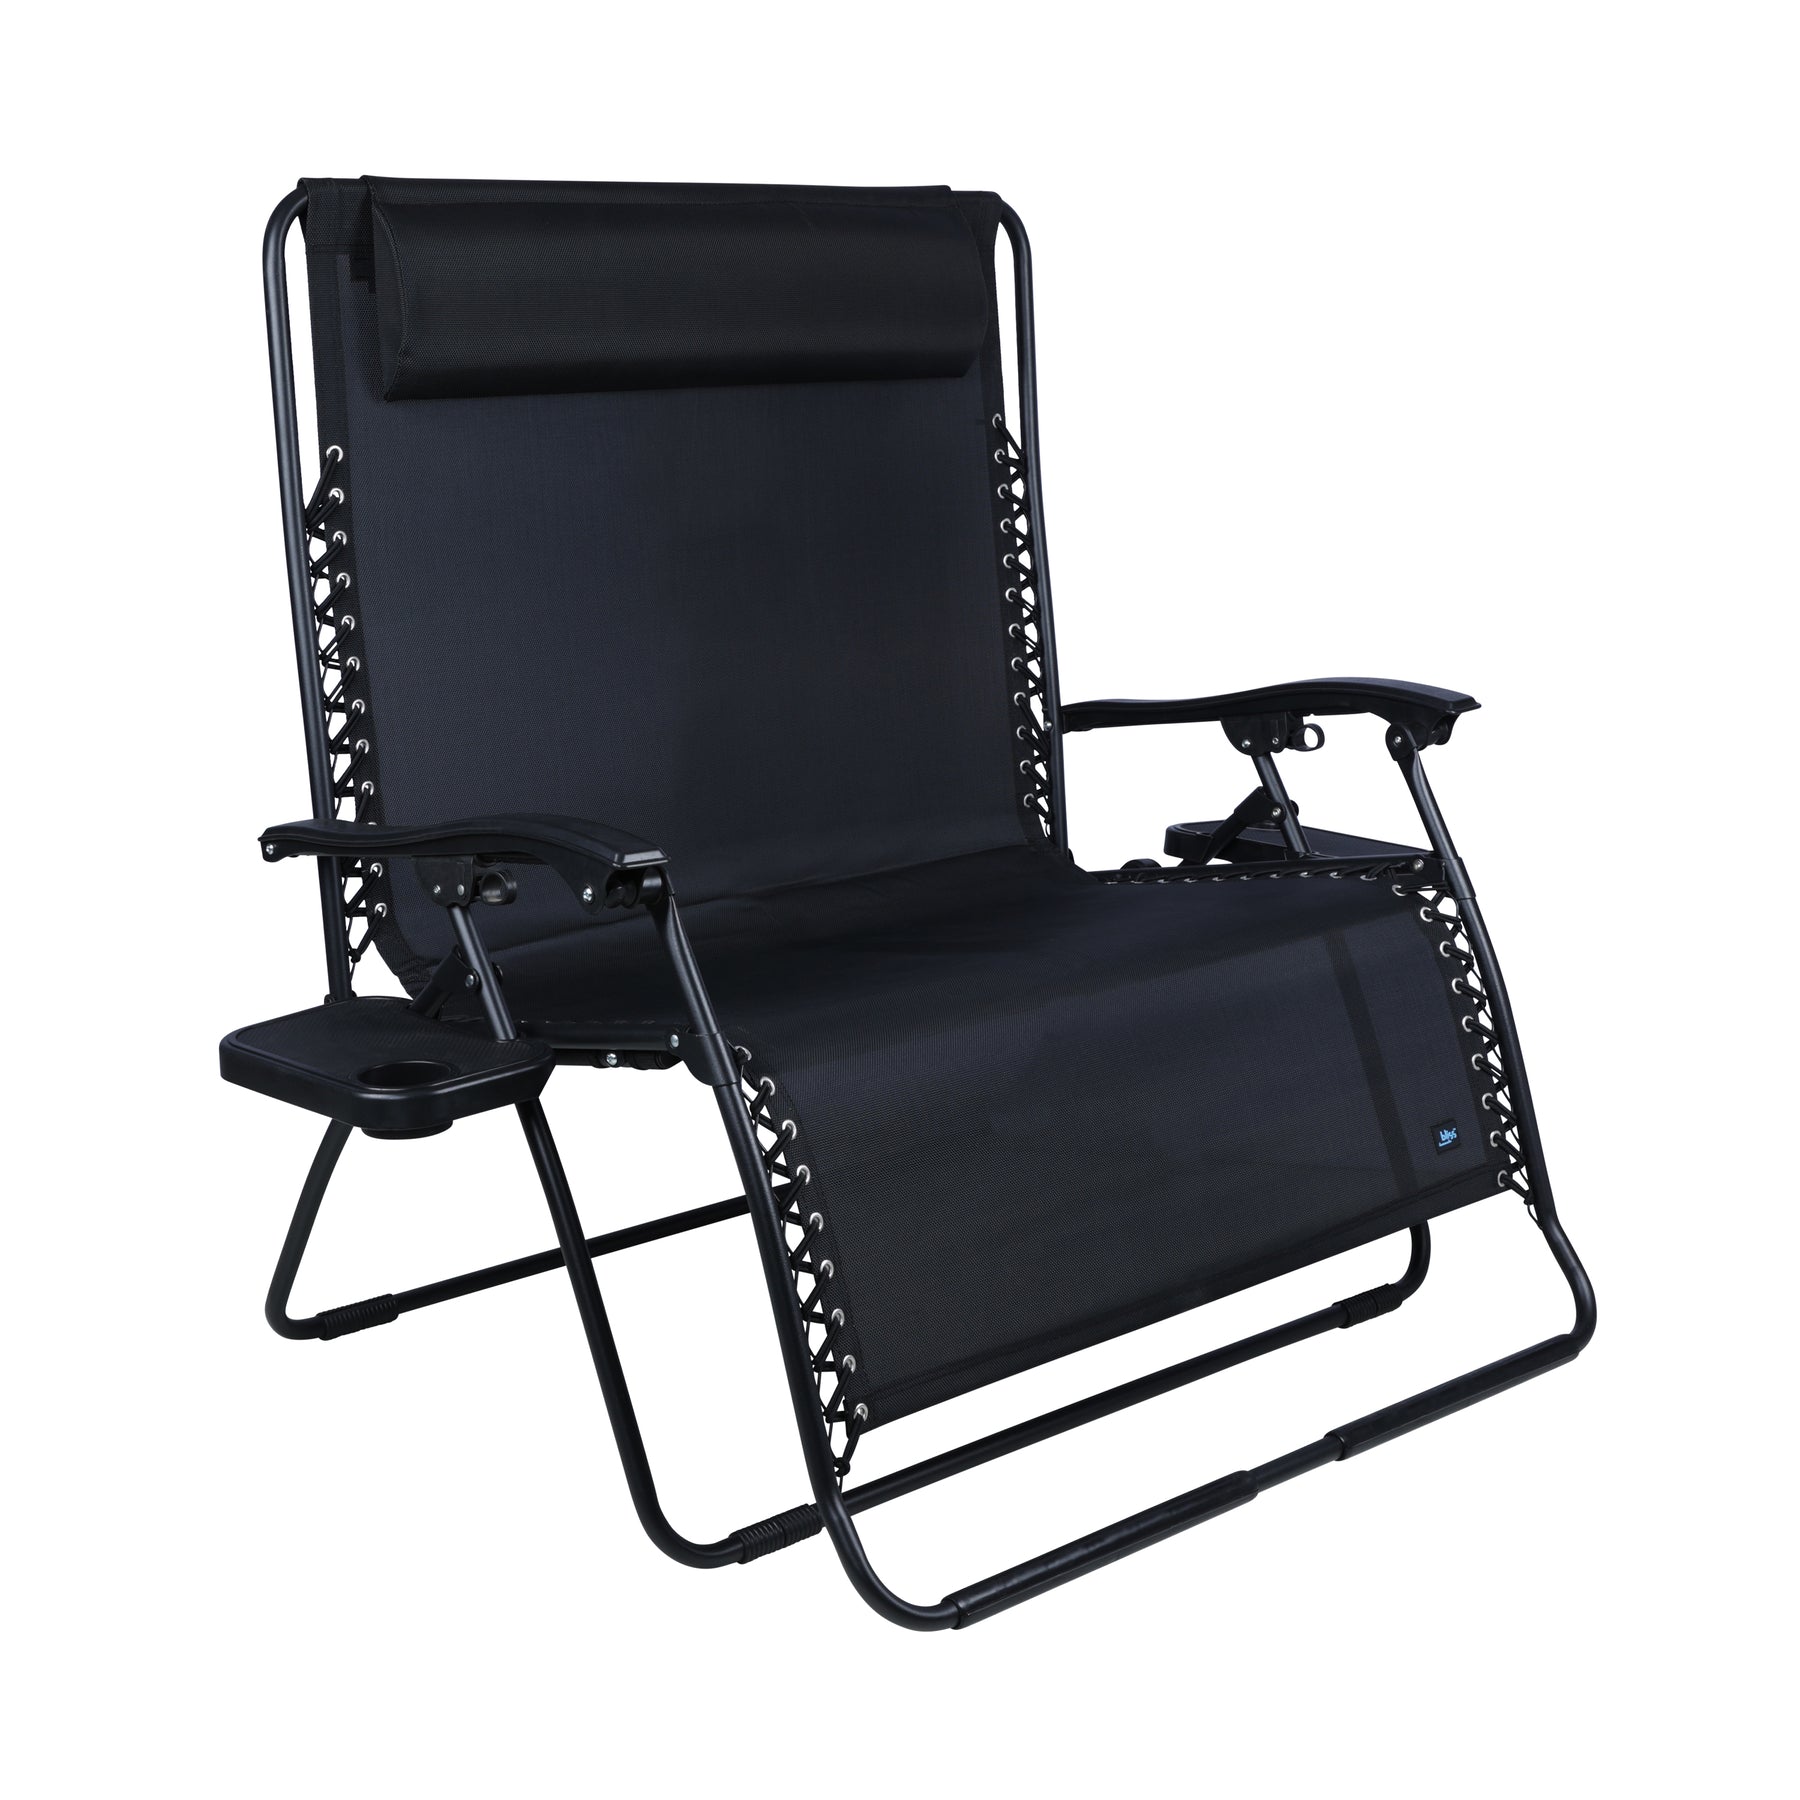 Bliss Hammocks 45-inch Wide 2-Person Zero Gravity Chair with Pillow and Drink Tray in the black variation.